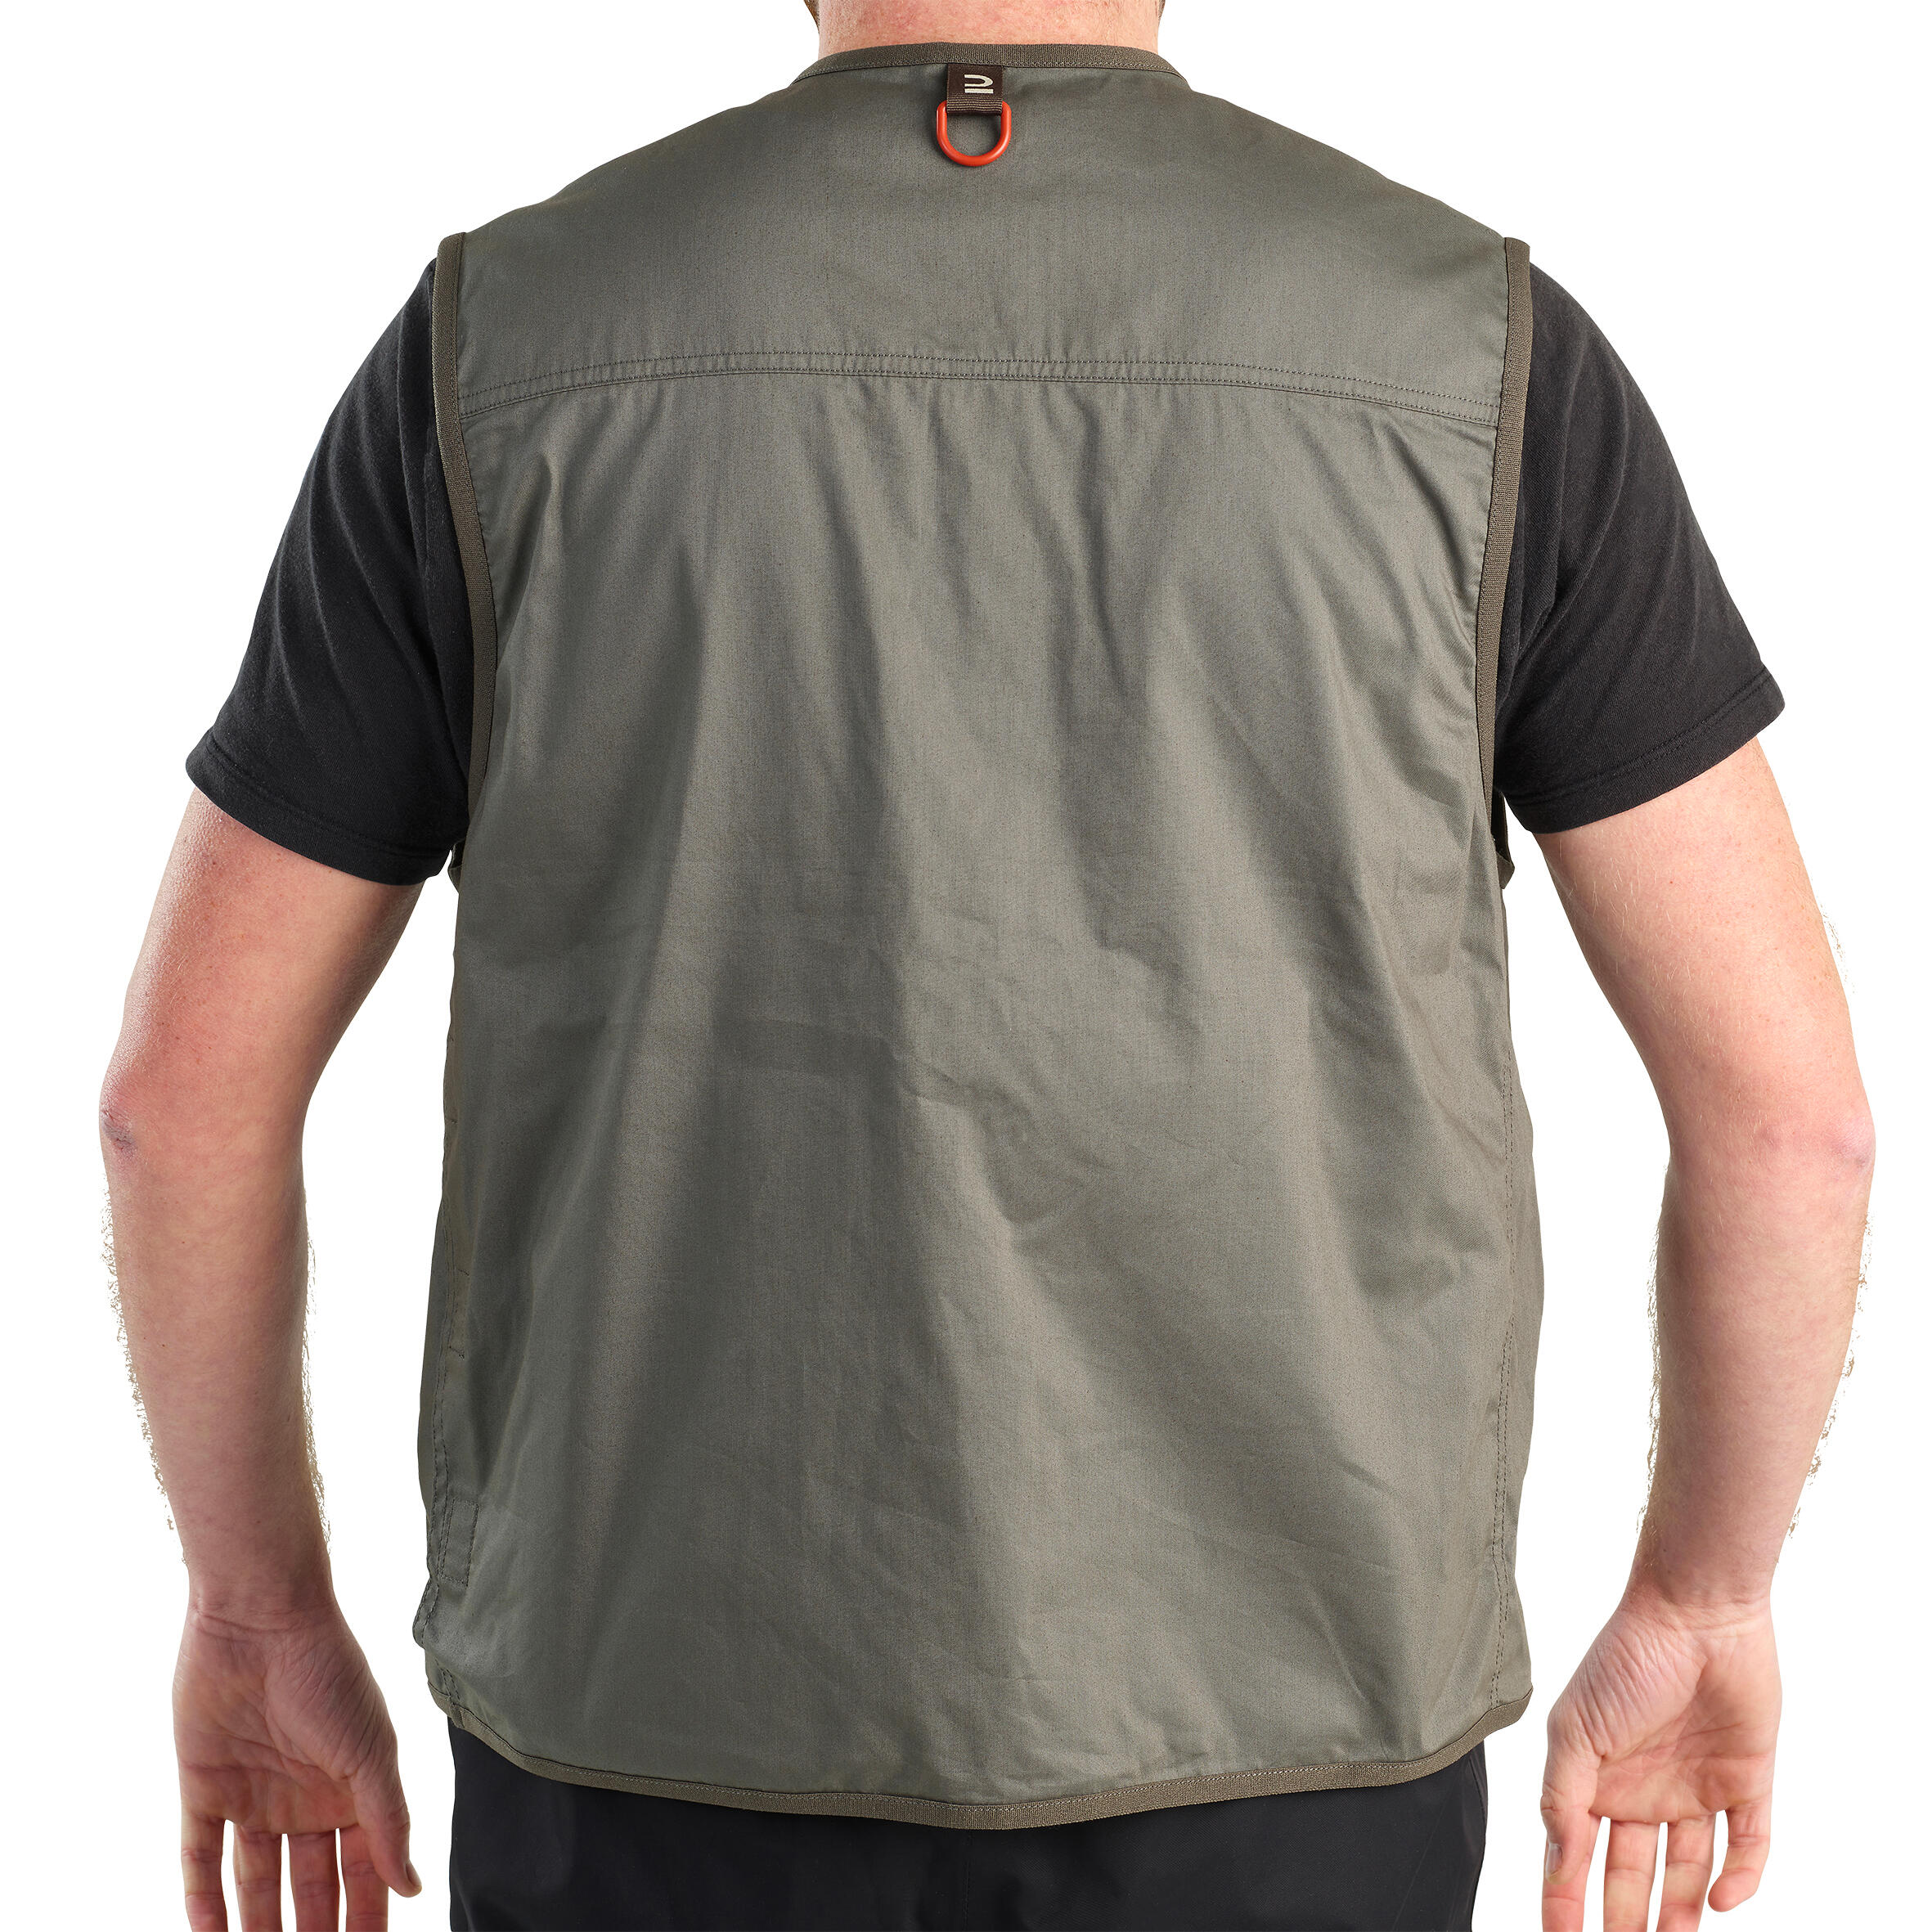  NewShot Fishing Vest for Men with Pockets, Fisherman Fly Fishing  Jacket : Clothing, Shoes & Jewelry